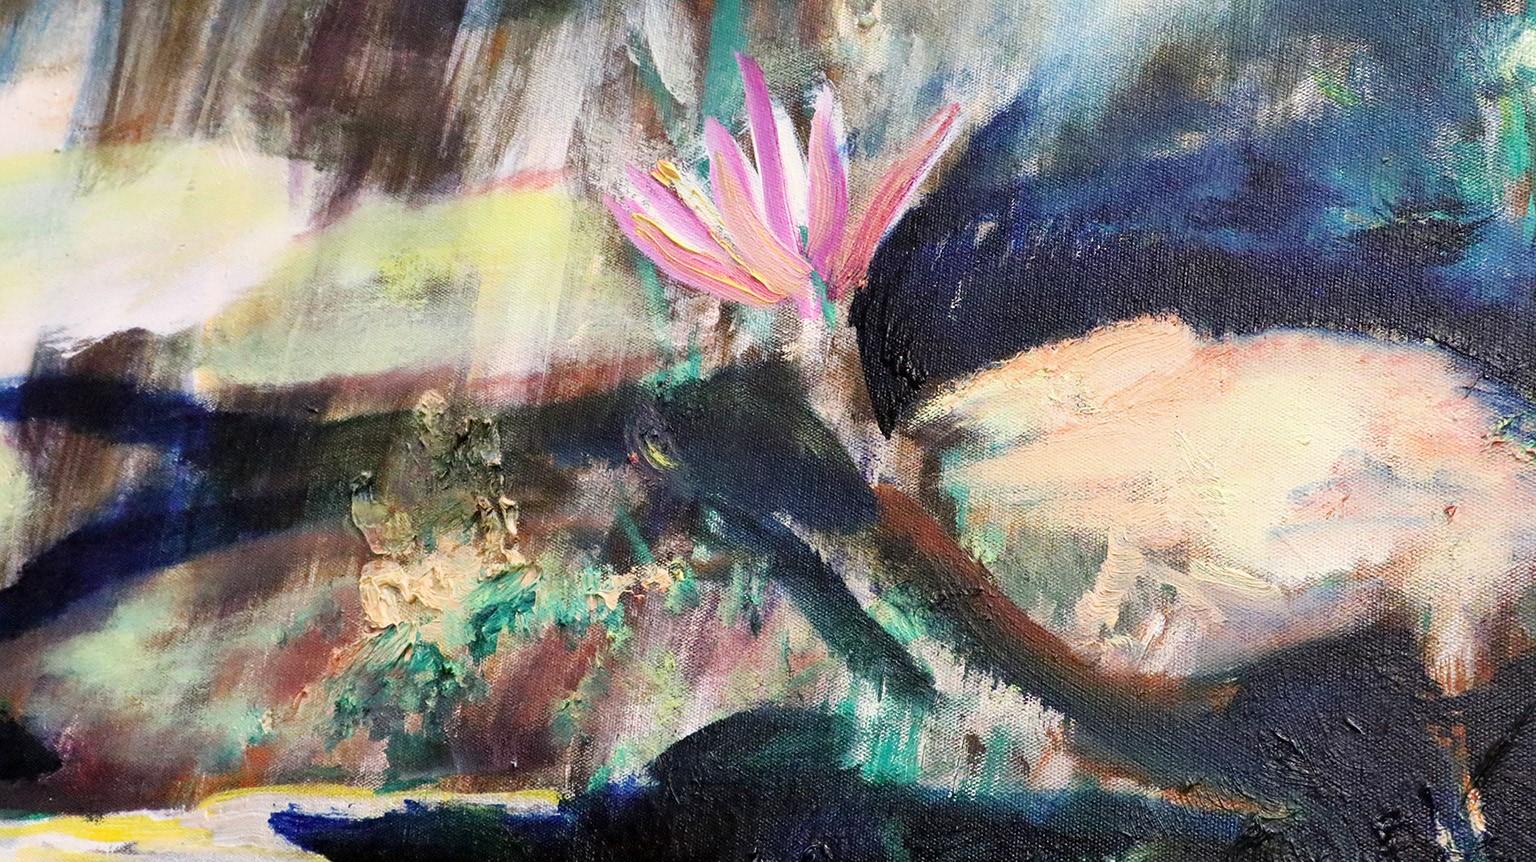 Two Water Lilies 38 X 60 - Painting by Antonio Ugarte